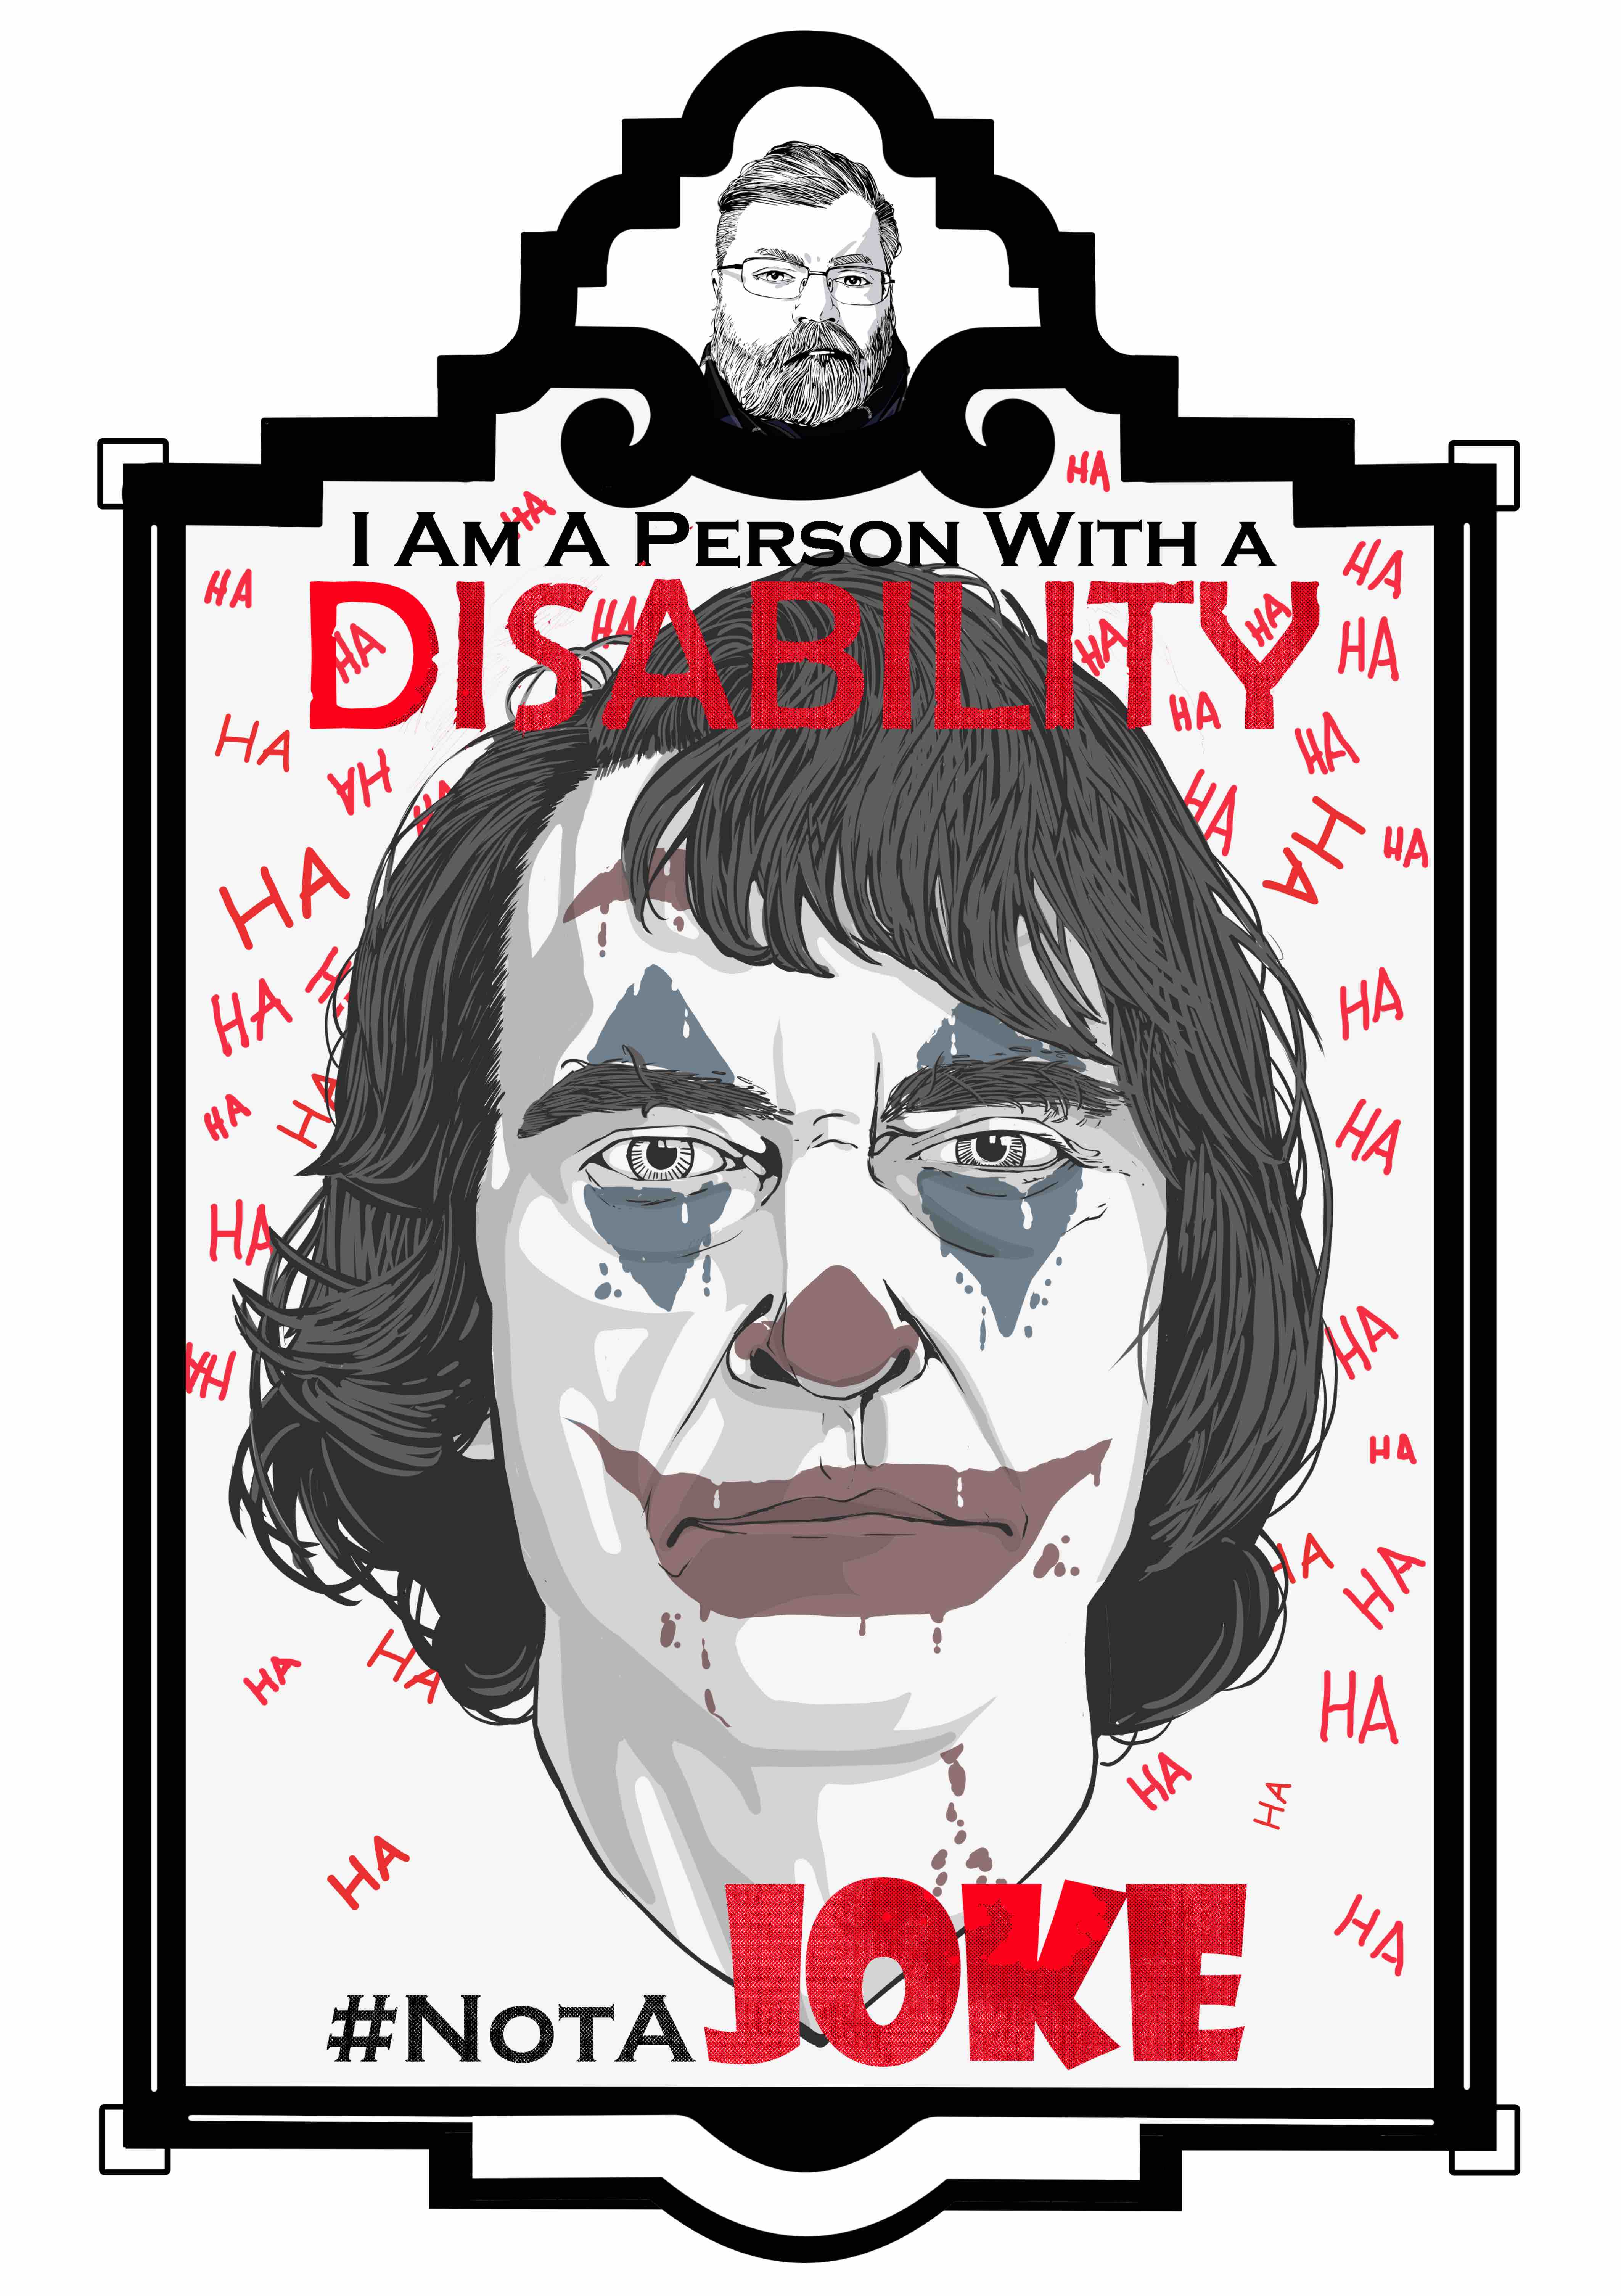 An illustration of the Jacqueline Phoenix’s portrayal of the joker from the neck up in an art deco frame. The frame consists of a small marquee at the top with an image of the artist and the main image below. The text “I am a person with a disability.’ Sits at the top of the illustration. The word “Disability” is in all caps and is colored a bright red. The text “# Not A Joke” is at the bottom of the illustration with “Joke” in bright red. The text “Joke’ is a wordmark. The Joker looks forward with dead eyes and a neutral expression on his face. He has shoulder length hair that is parted on the left. The joker’s Clown makeup consists of blue triangles above and below his eyes and red paint on his nose and mouth. The background is filled with the text HA all in varied sizes and angles. 